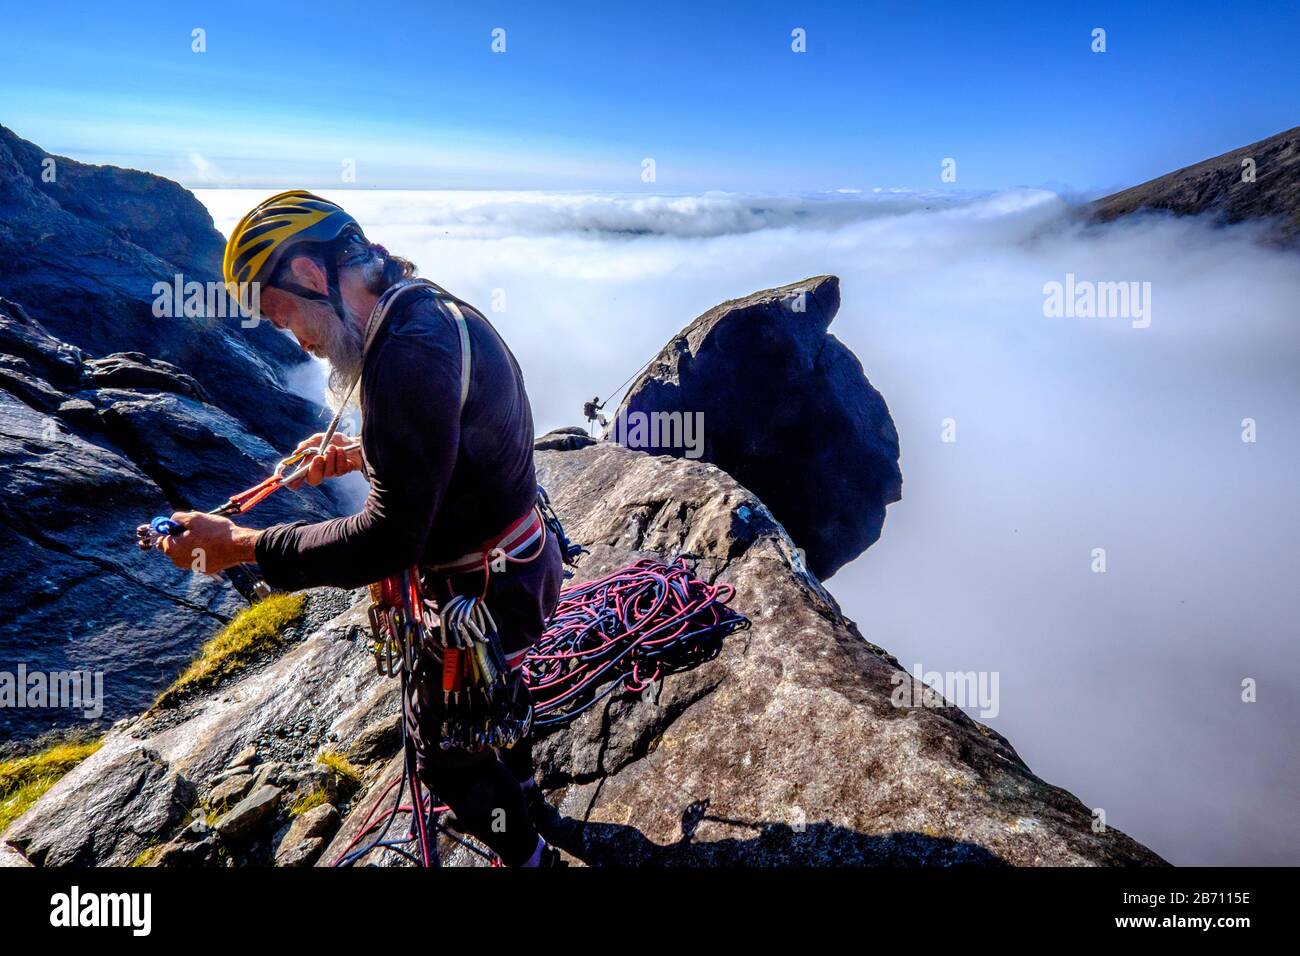 Rock climbing on the Cioch in the Cuillin mountains on the Isle of Skye, Scotland Stock Photo